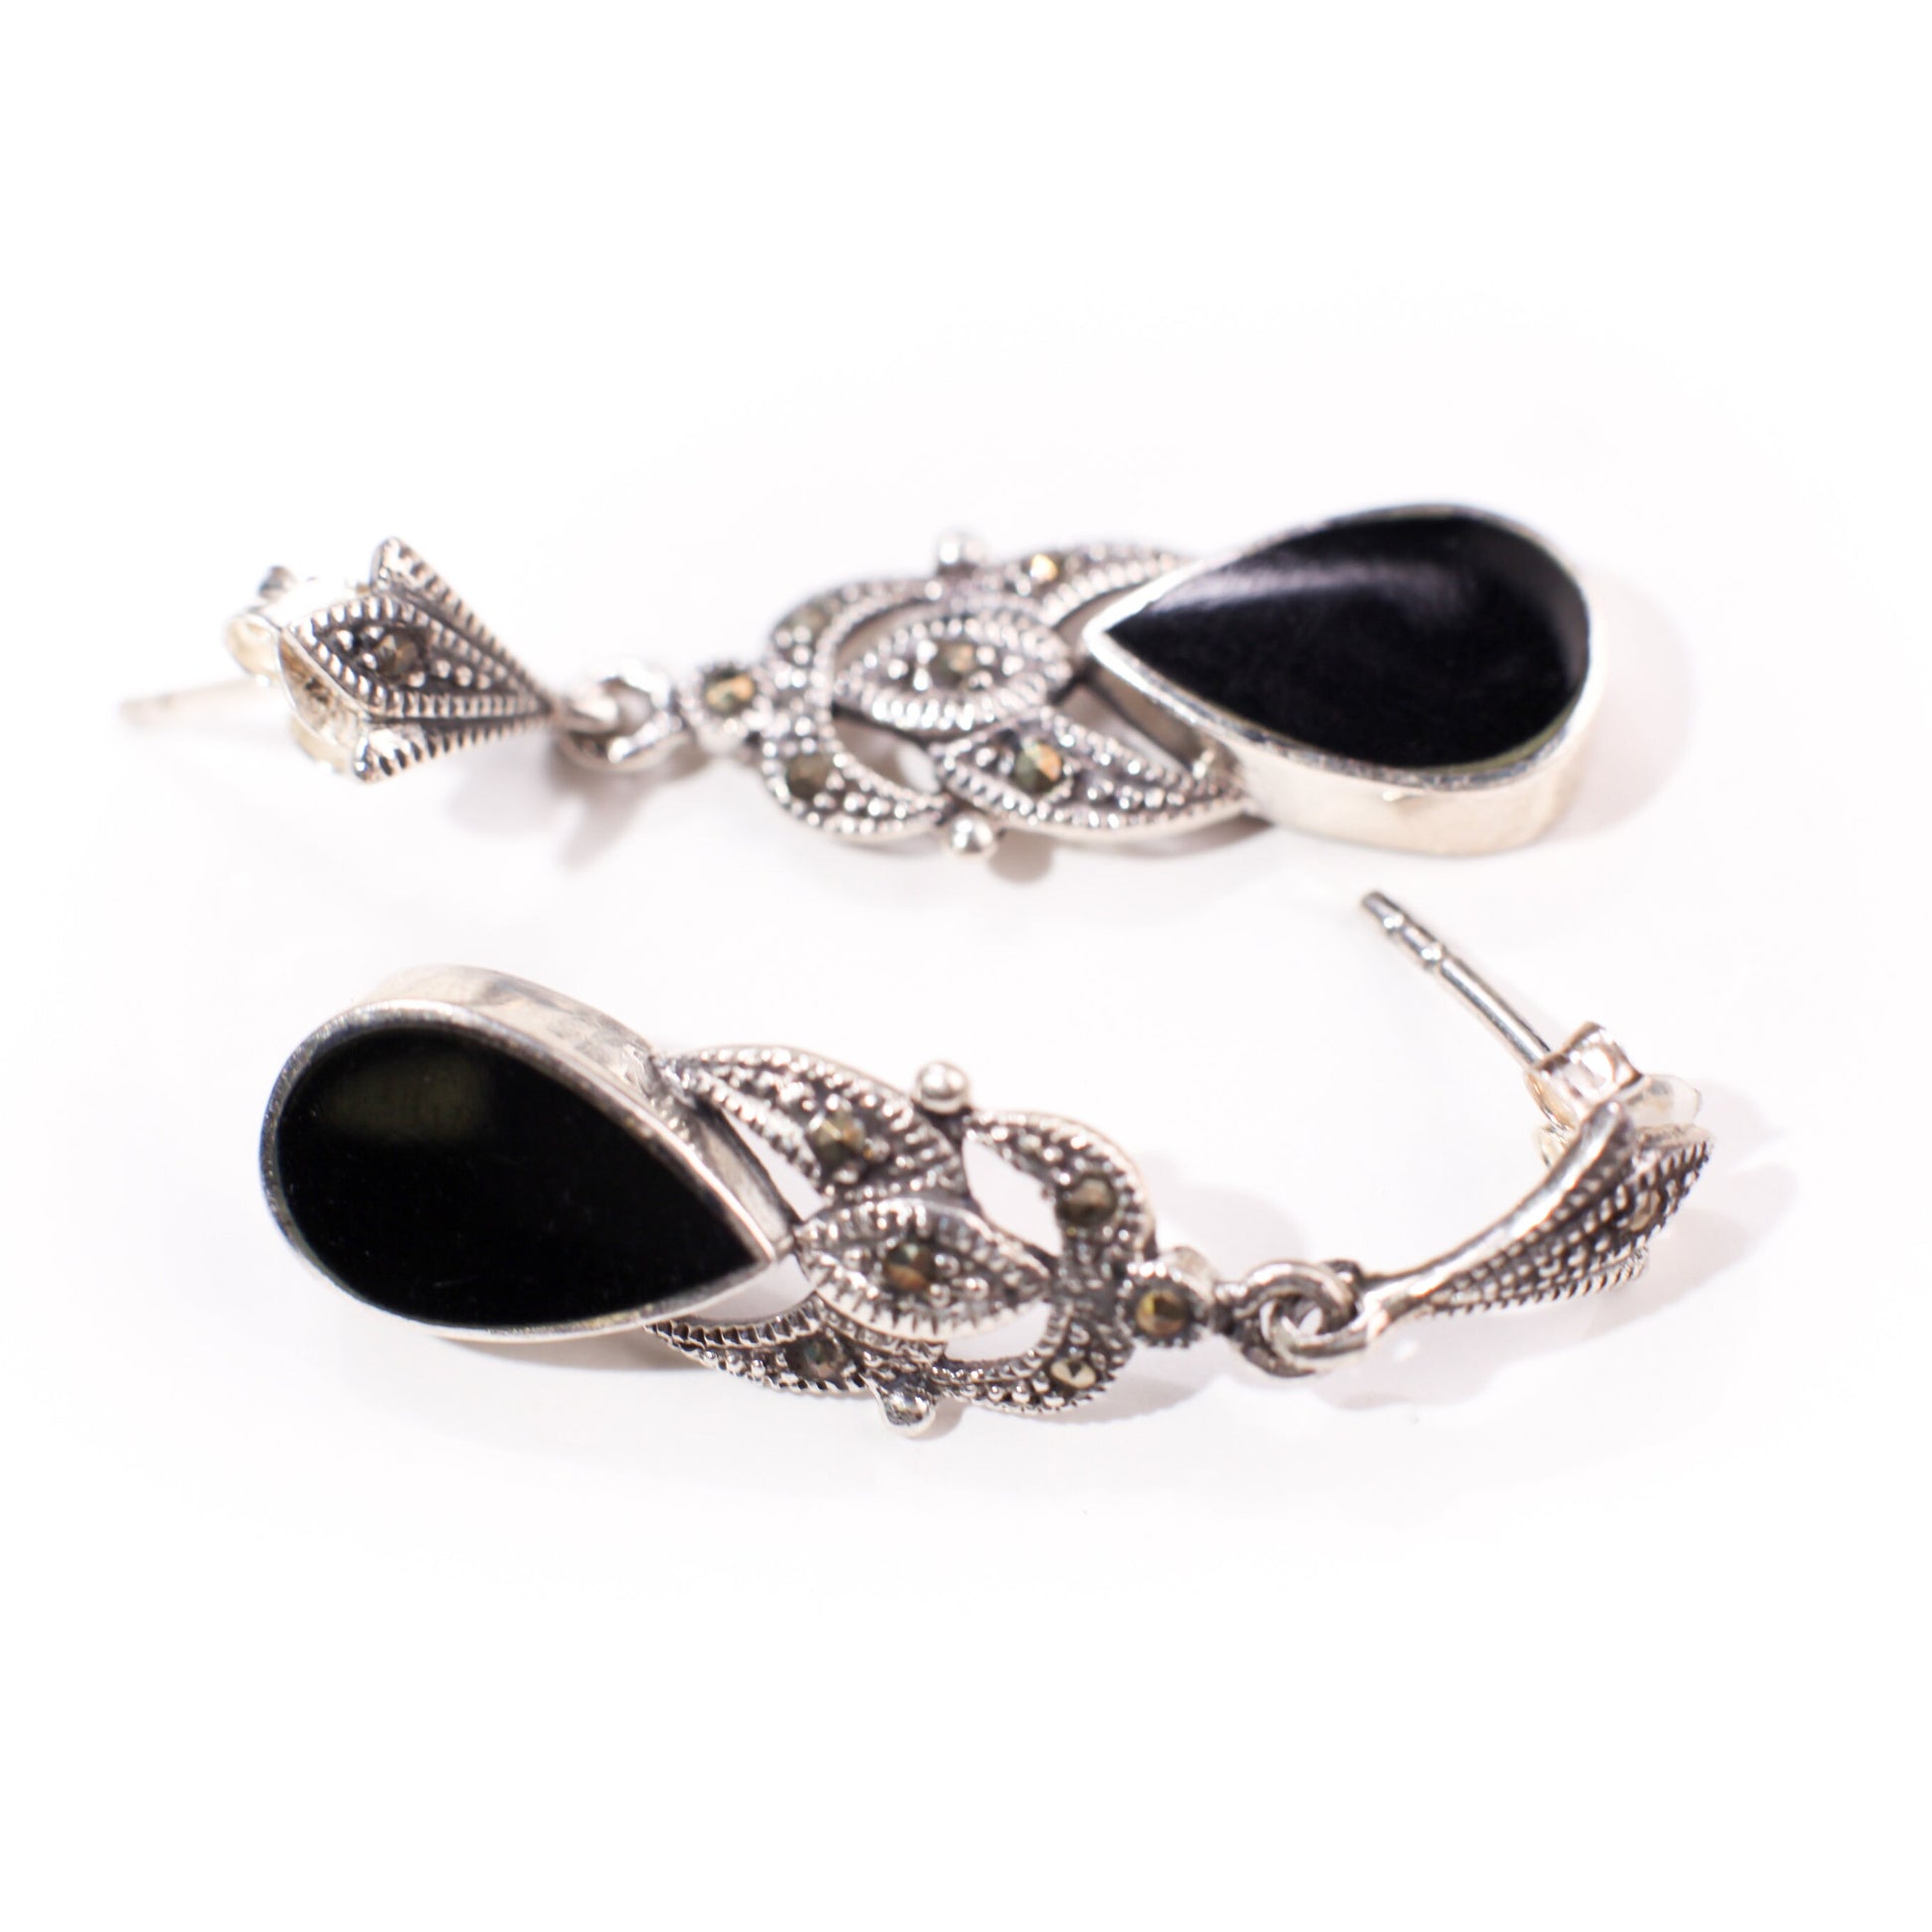 Marcasite 925 Sterling Silver Earrings Post with Teardrop Dangle Black Onyx, Vintage, Antique Marcasite Earrings Gift for her